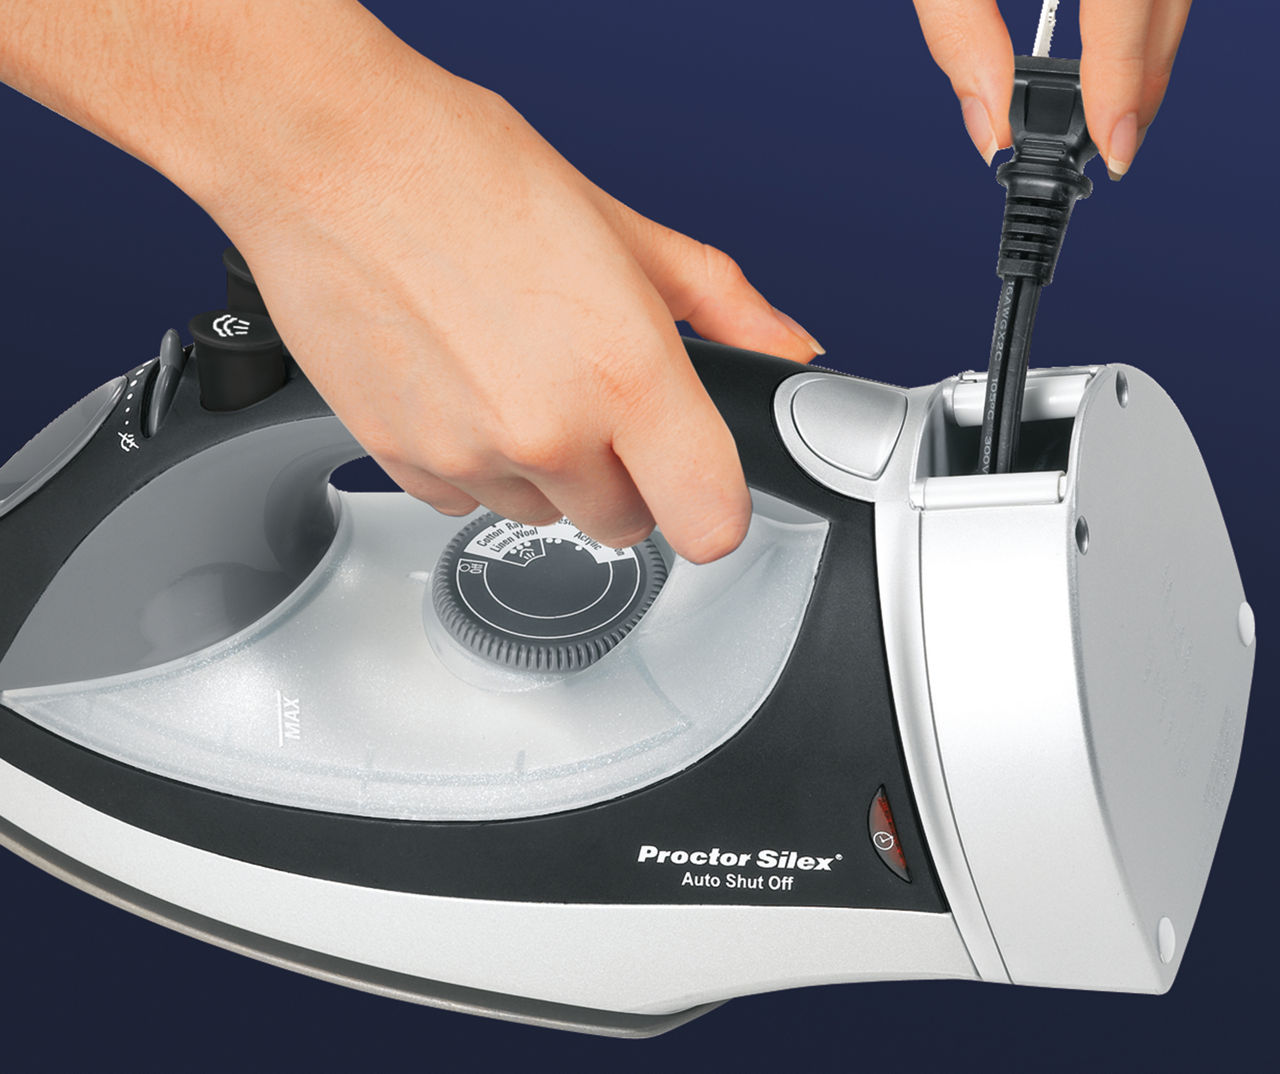 MOOSOO Steam Iron, 1800W Portable Steam Iron with Auto-off, Non-Stick  Soleplate Home Iron - Yahoo Shopping